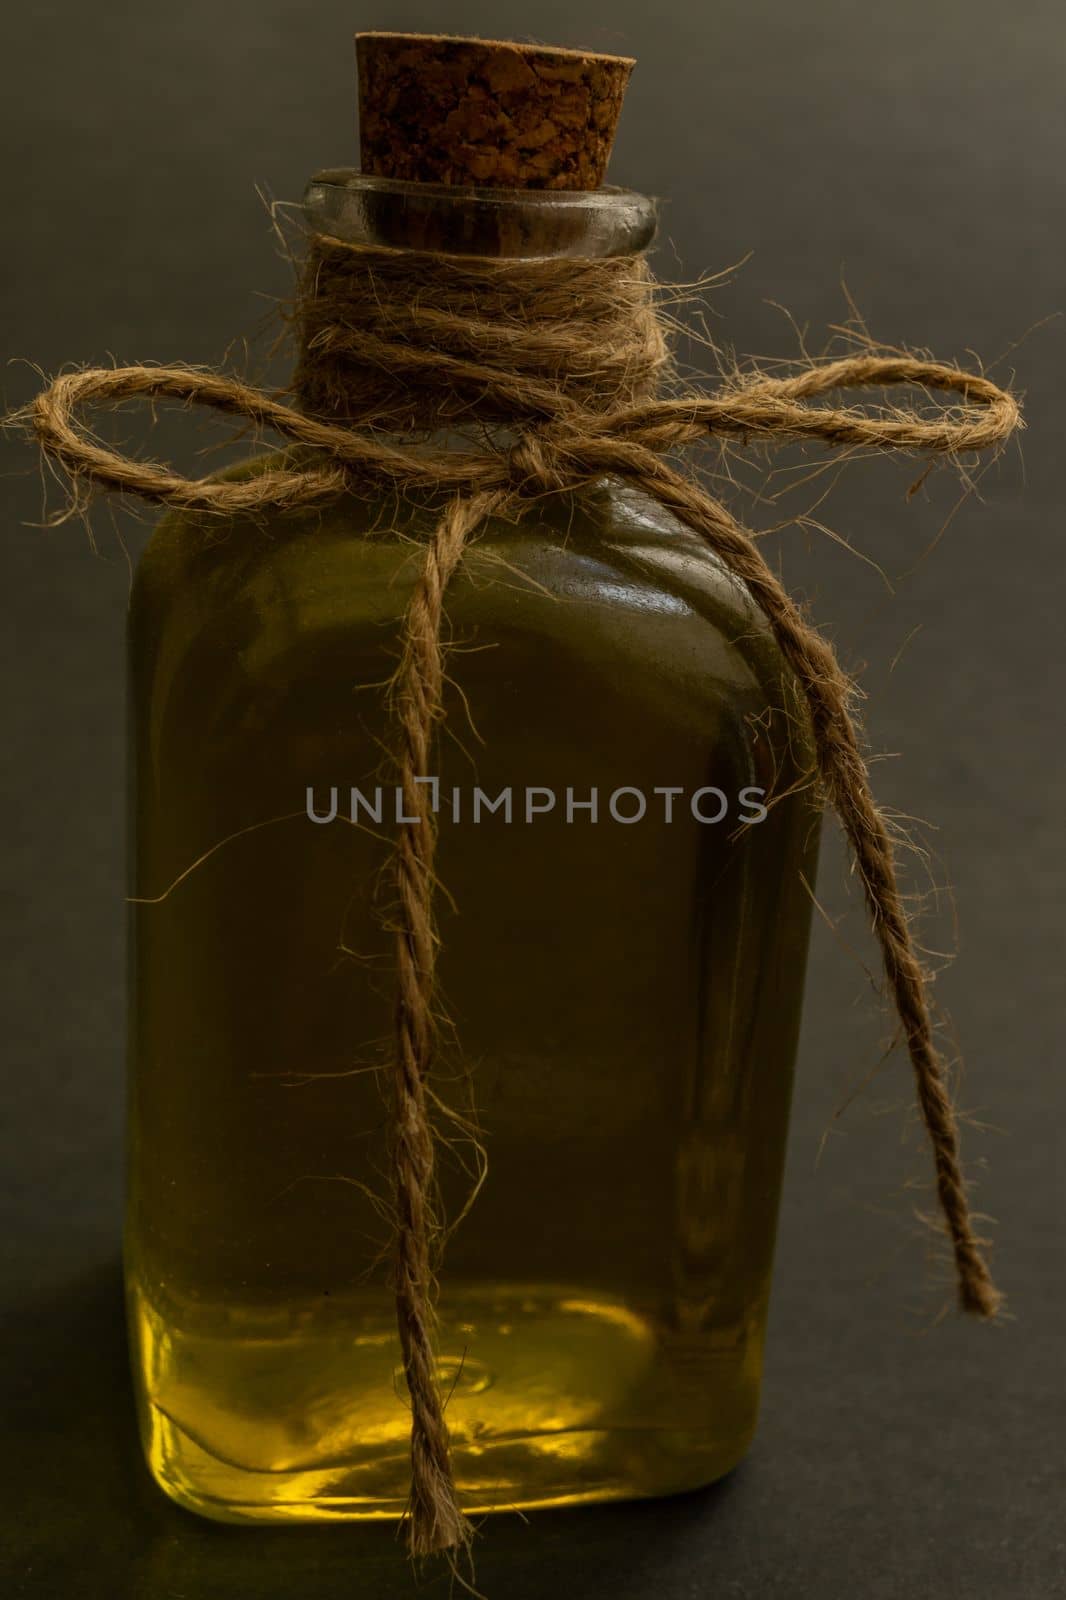 close-up of a glass bottle with cork stopper containing rosemary healing oil